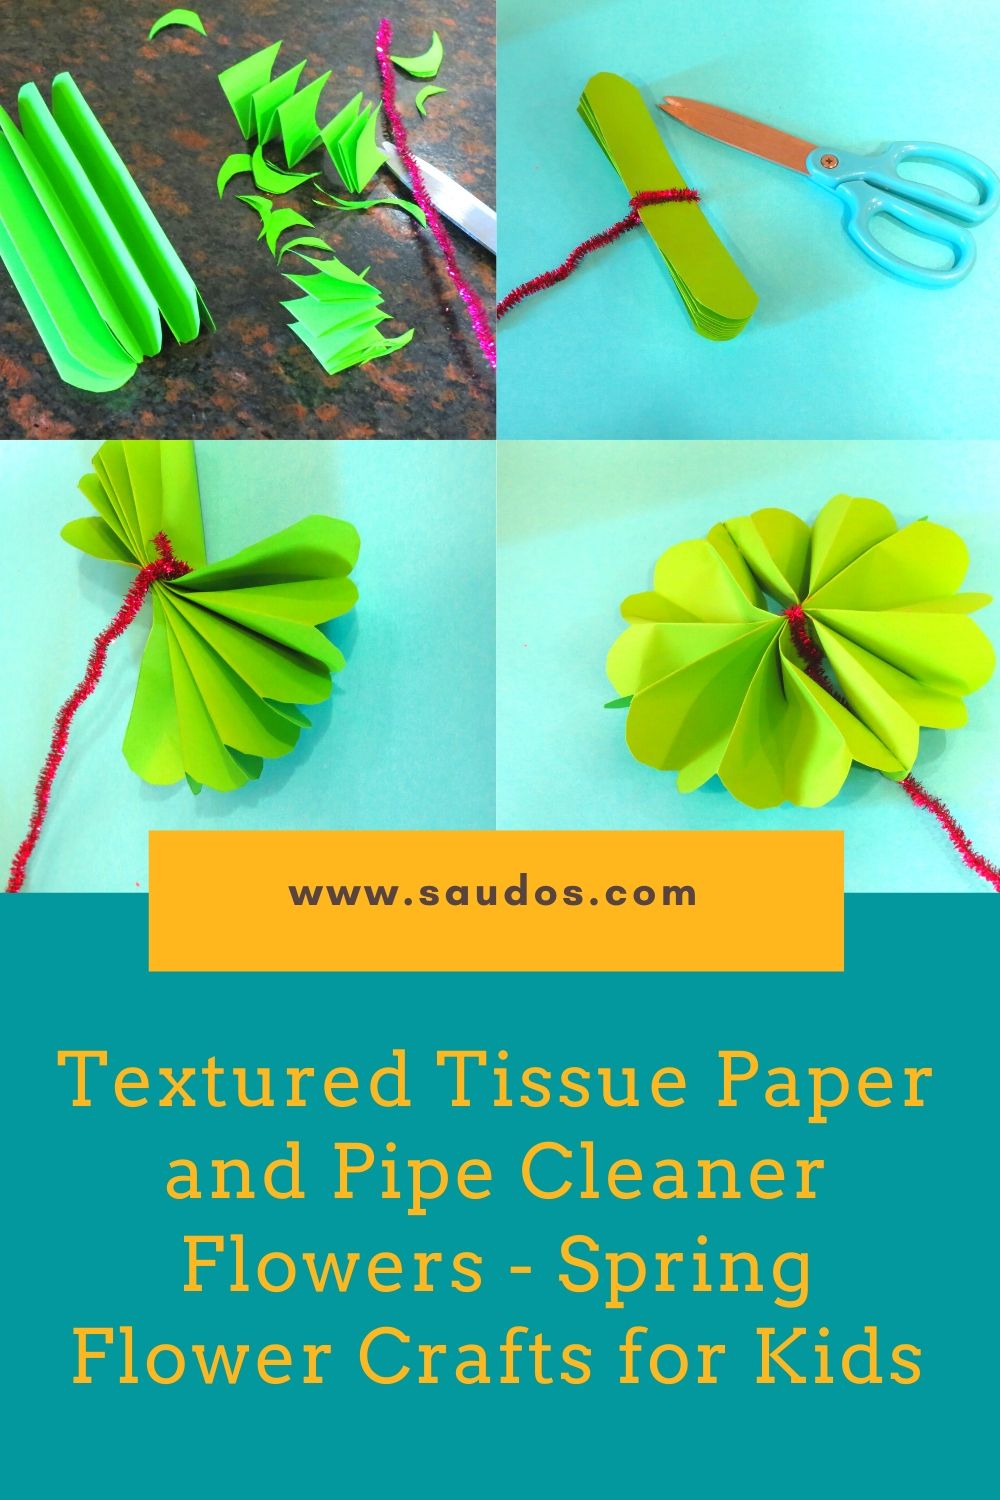 Textured Tissue Paper and Pipe Cleaner Flowers - Spring Flower Crafts for Kids